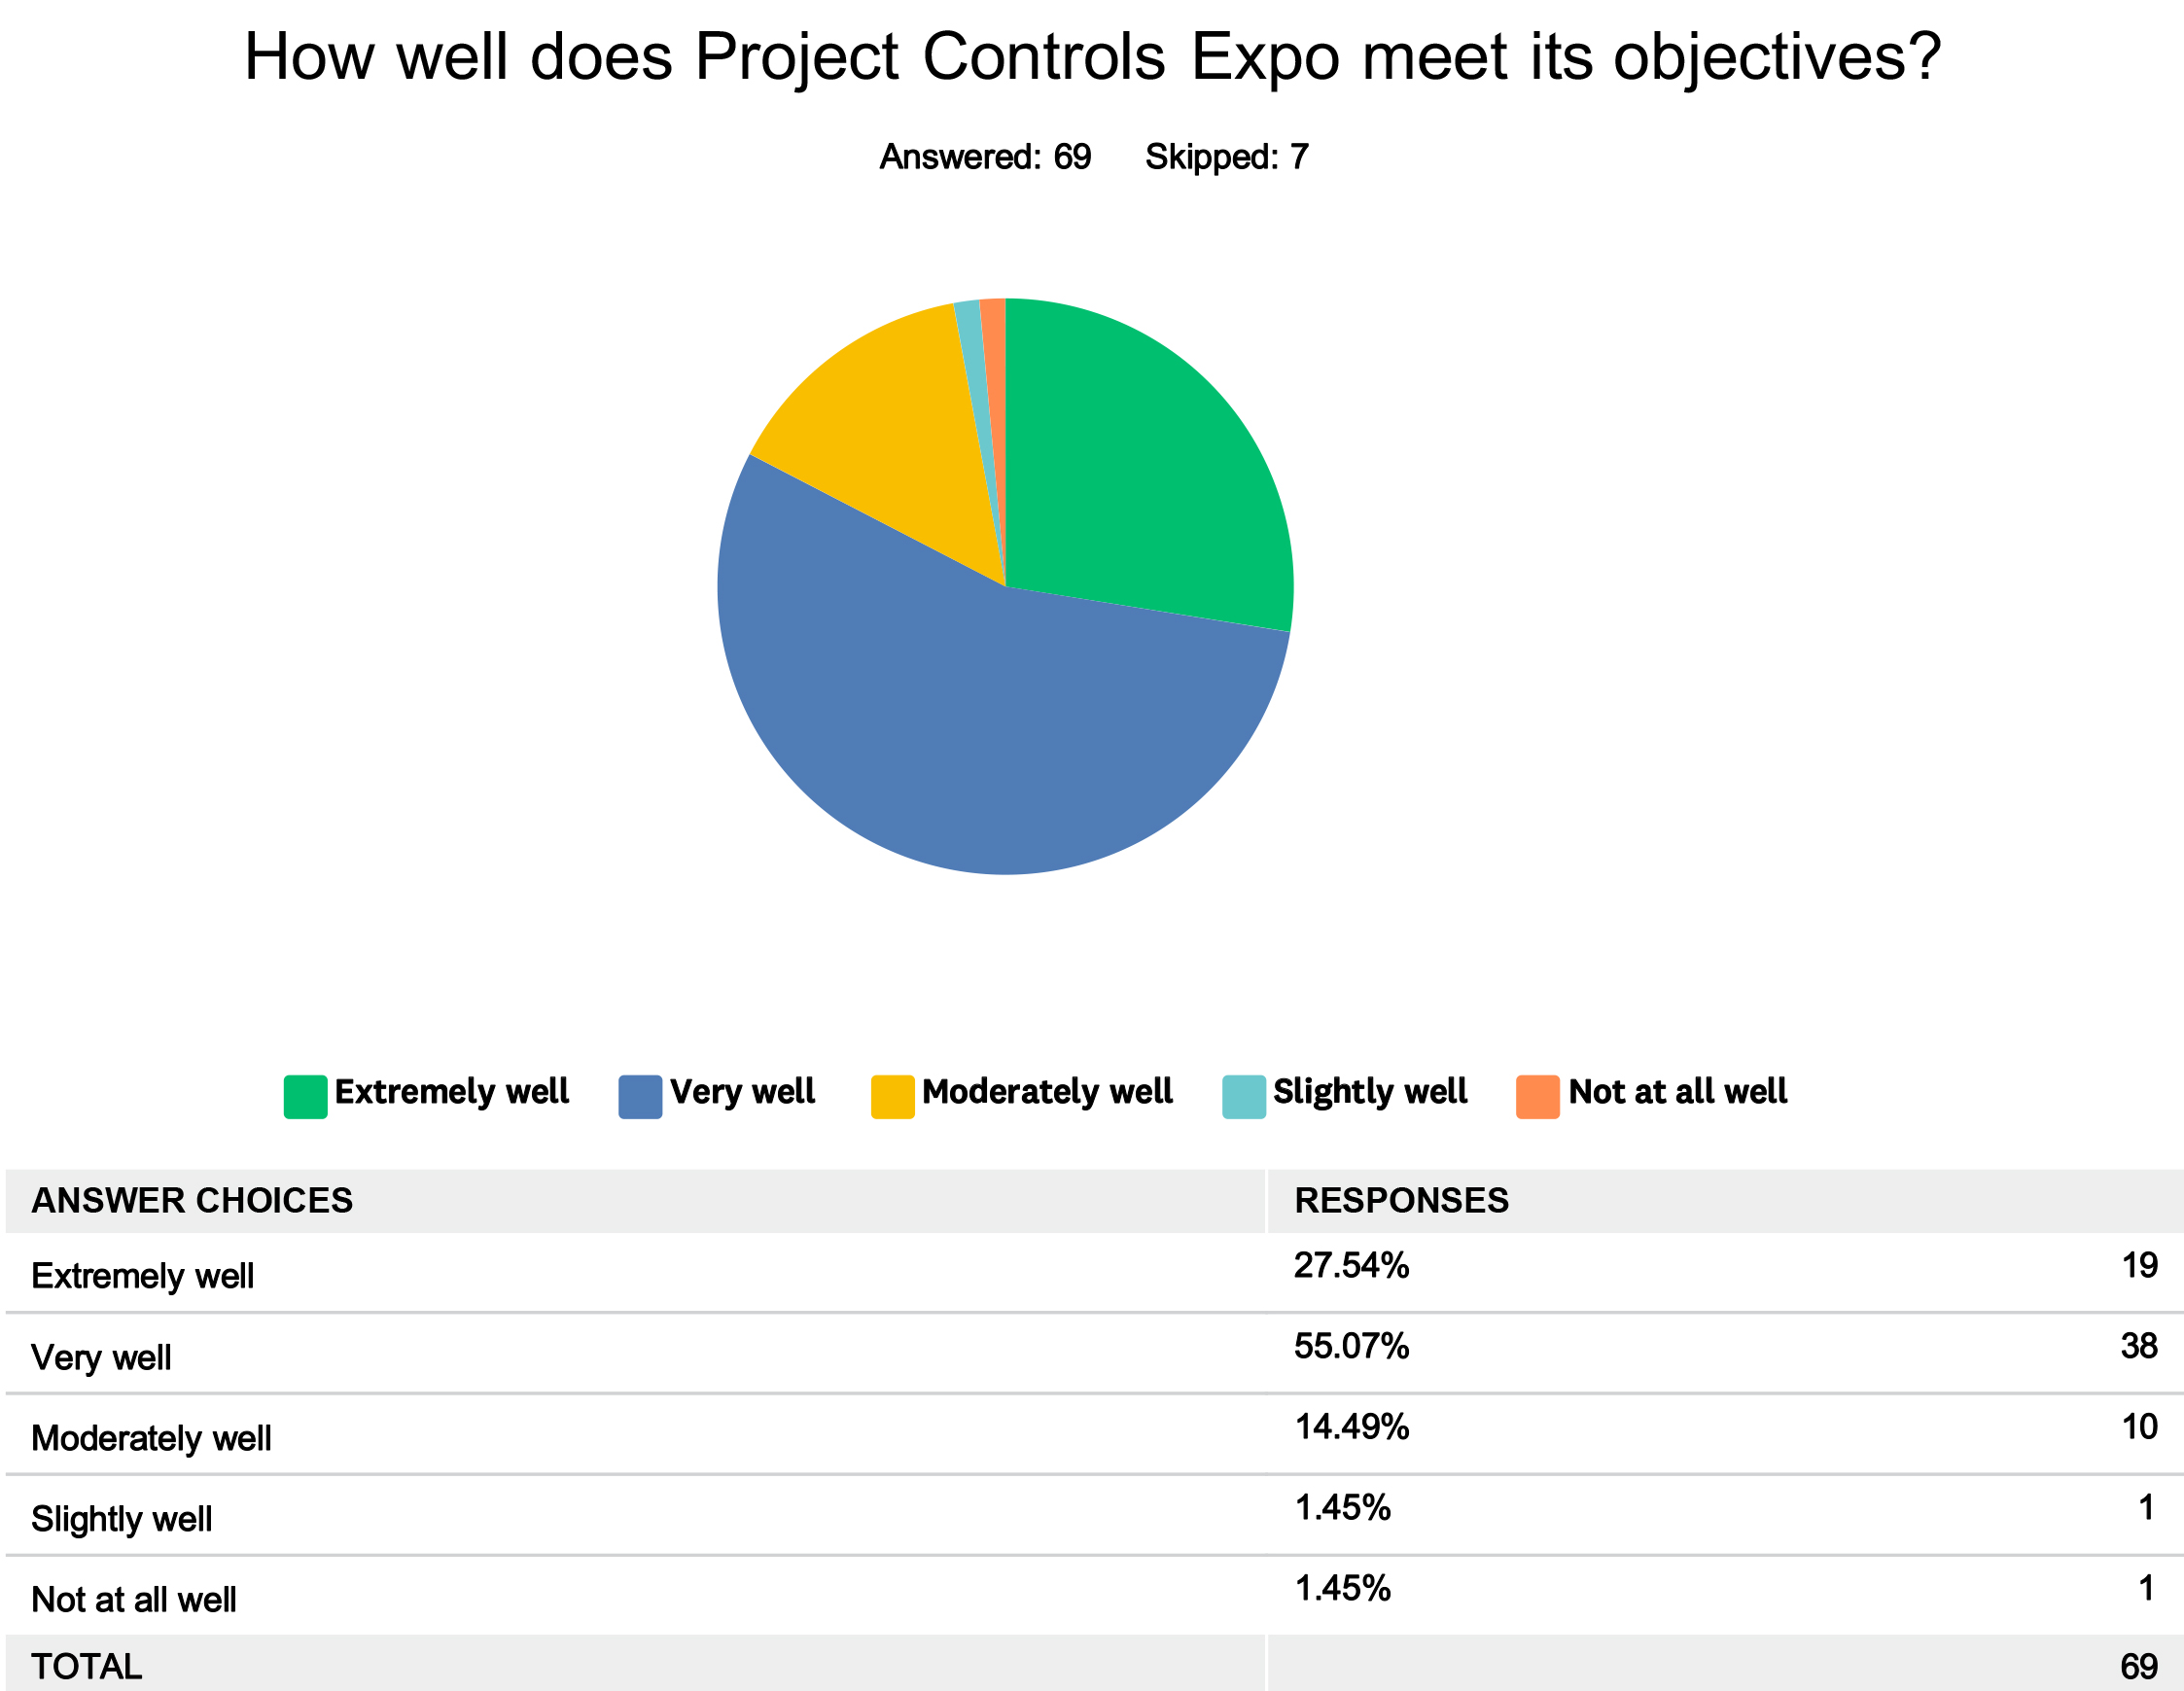 Project Controls Expo